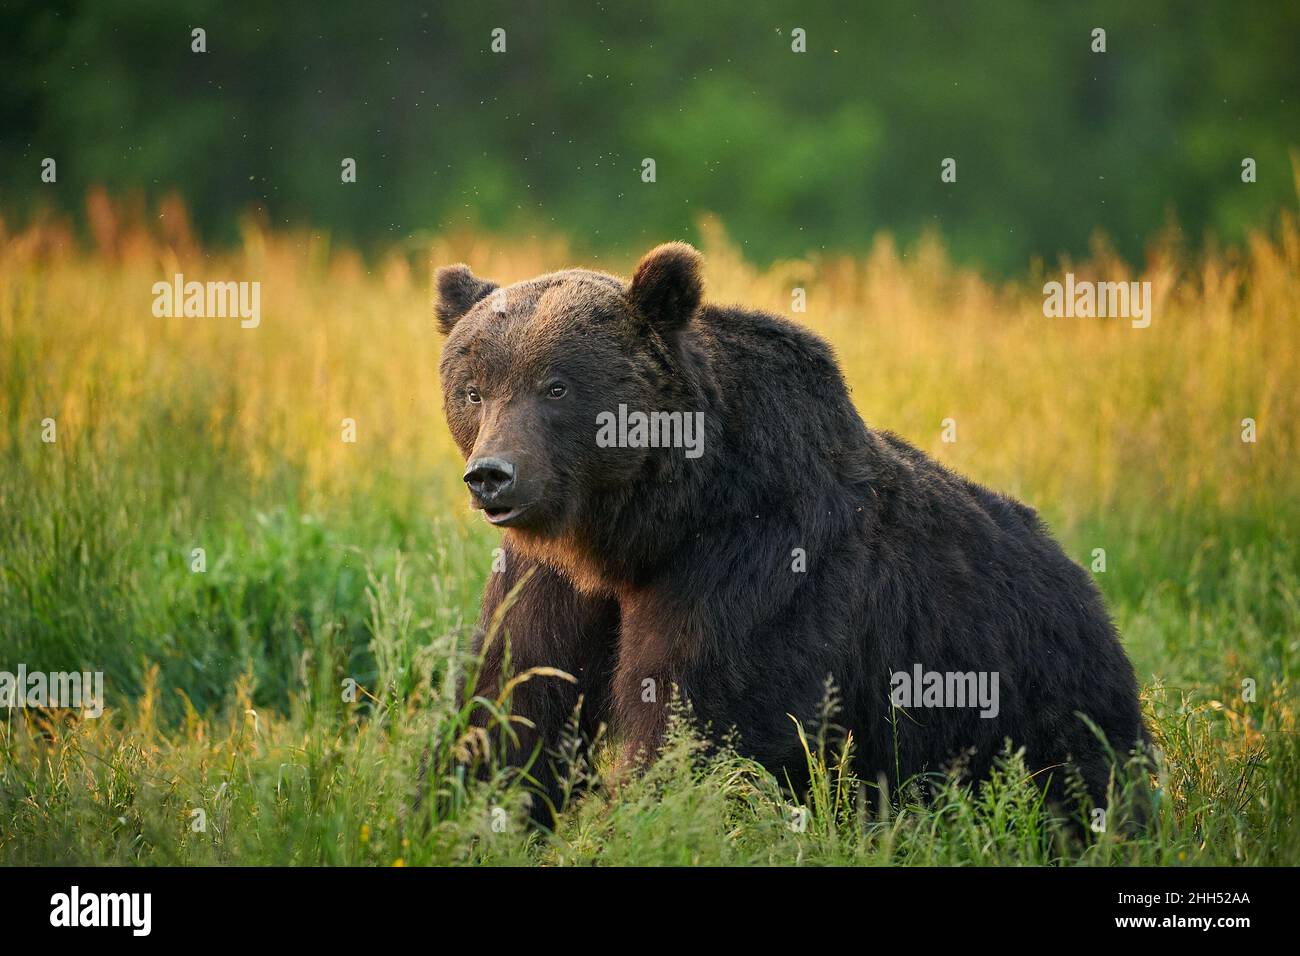 Wildlife scene from Poland nature. Dangerous animal in nature forest and meadow habitat. Brown bear, close-up detail portrait. Stock Photo